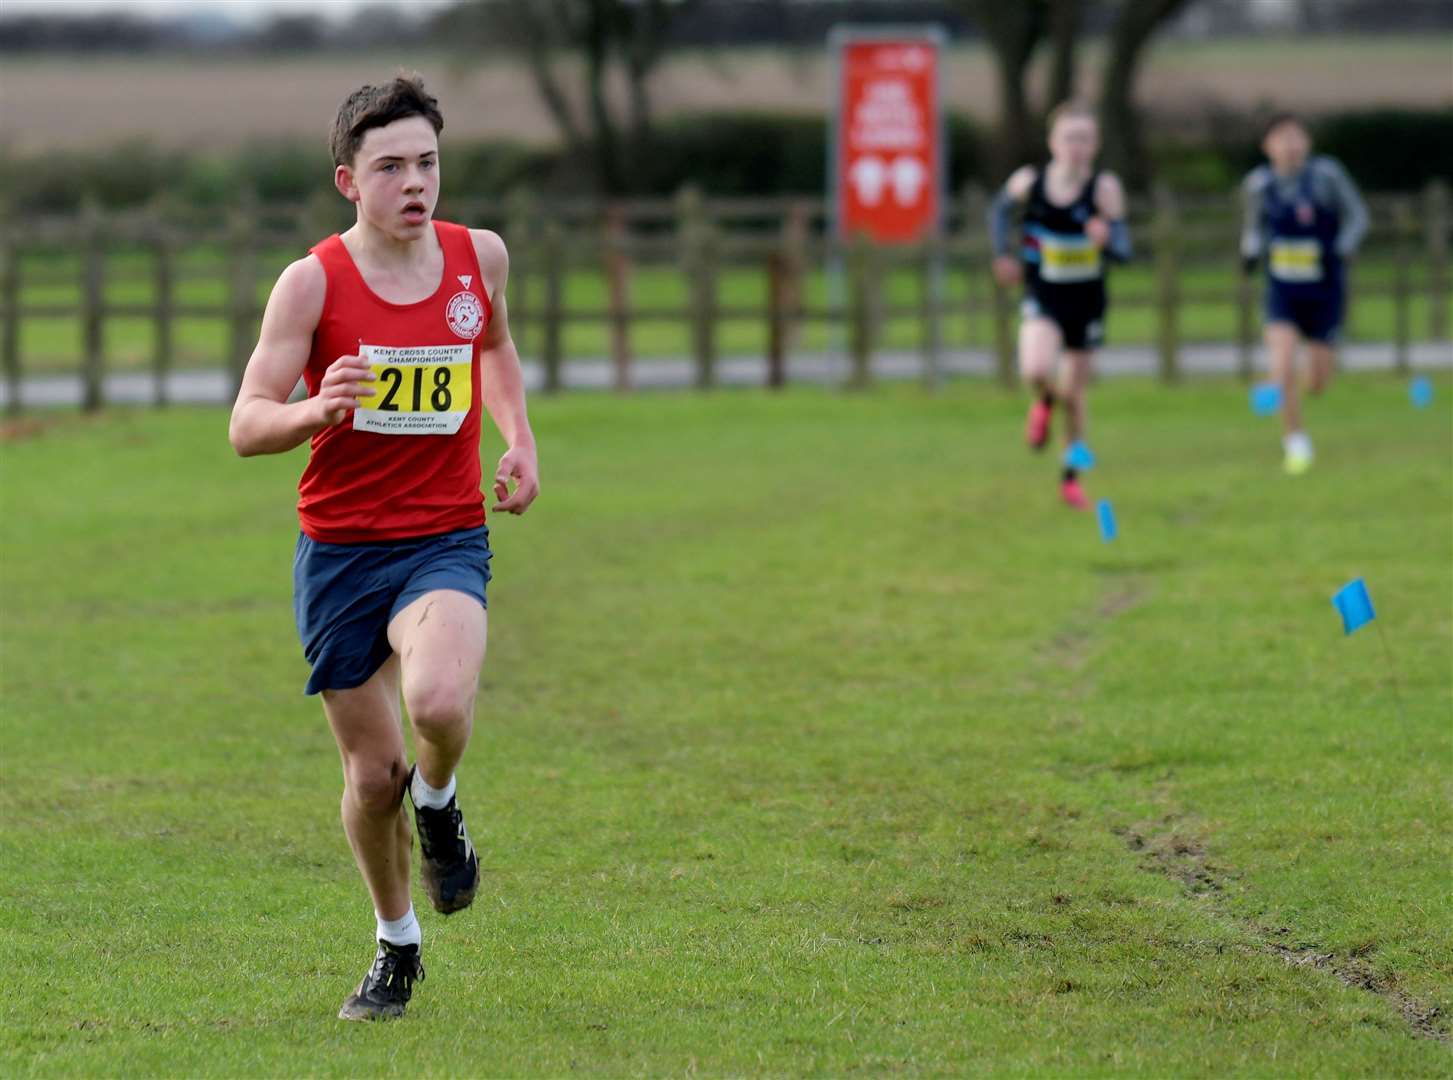 Jonson Foster flies the flag for Invicta East Kent in the under-15 boys’ race. Picture: Barry Goodwin